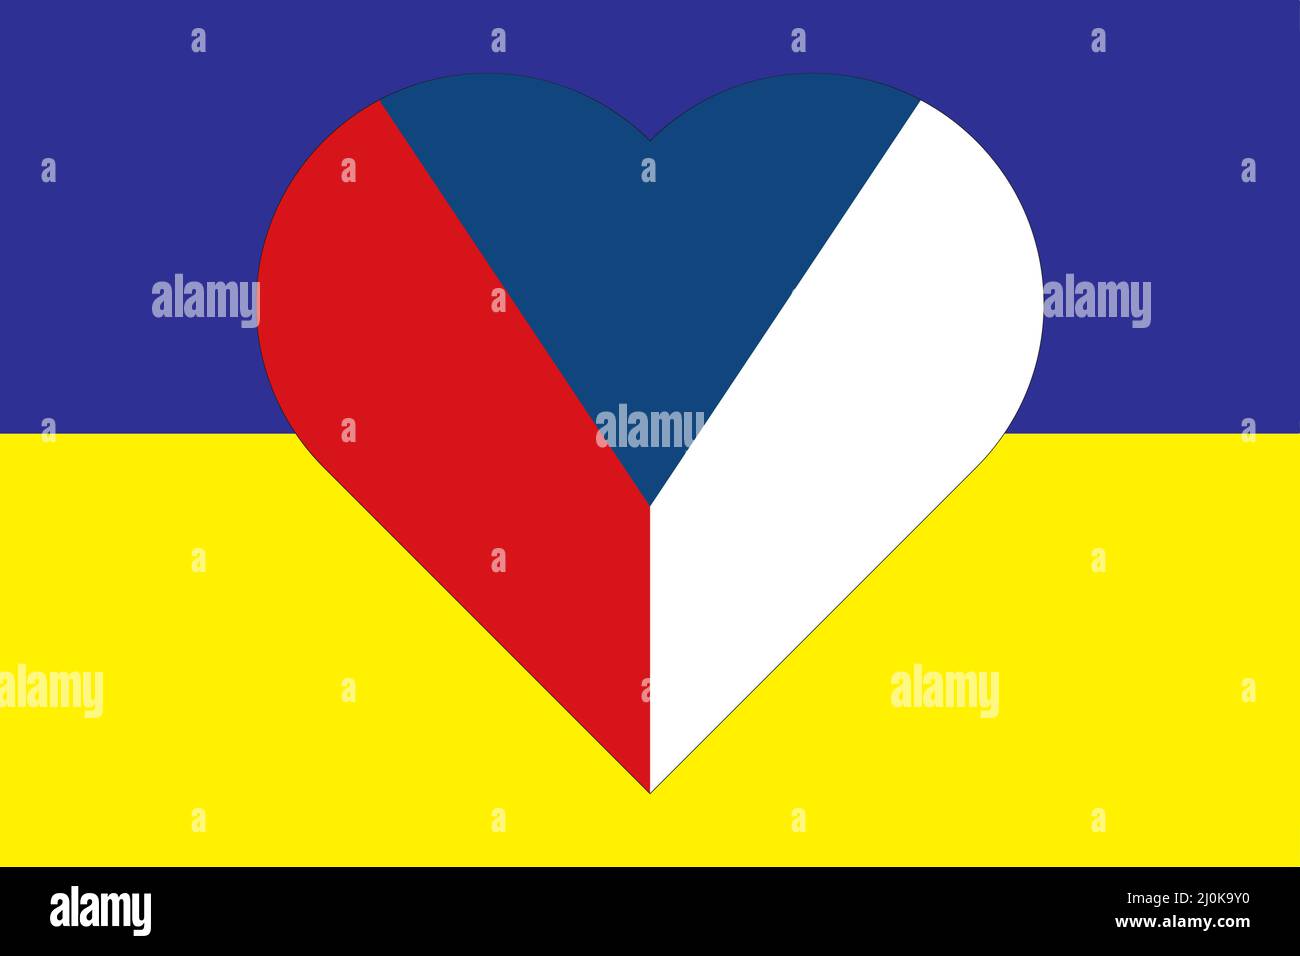 Heart painted in the colors of the flag of Czech republic on the flag of Ukraine. Illustration of a heart with the national symbol of Czech republic o Stock Vector